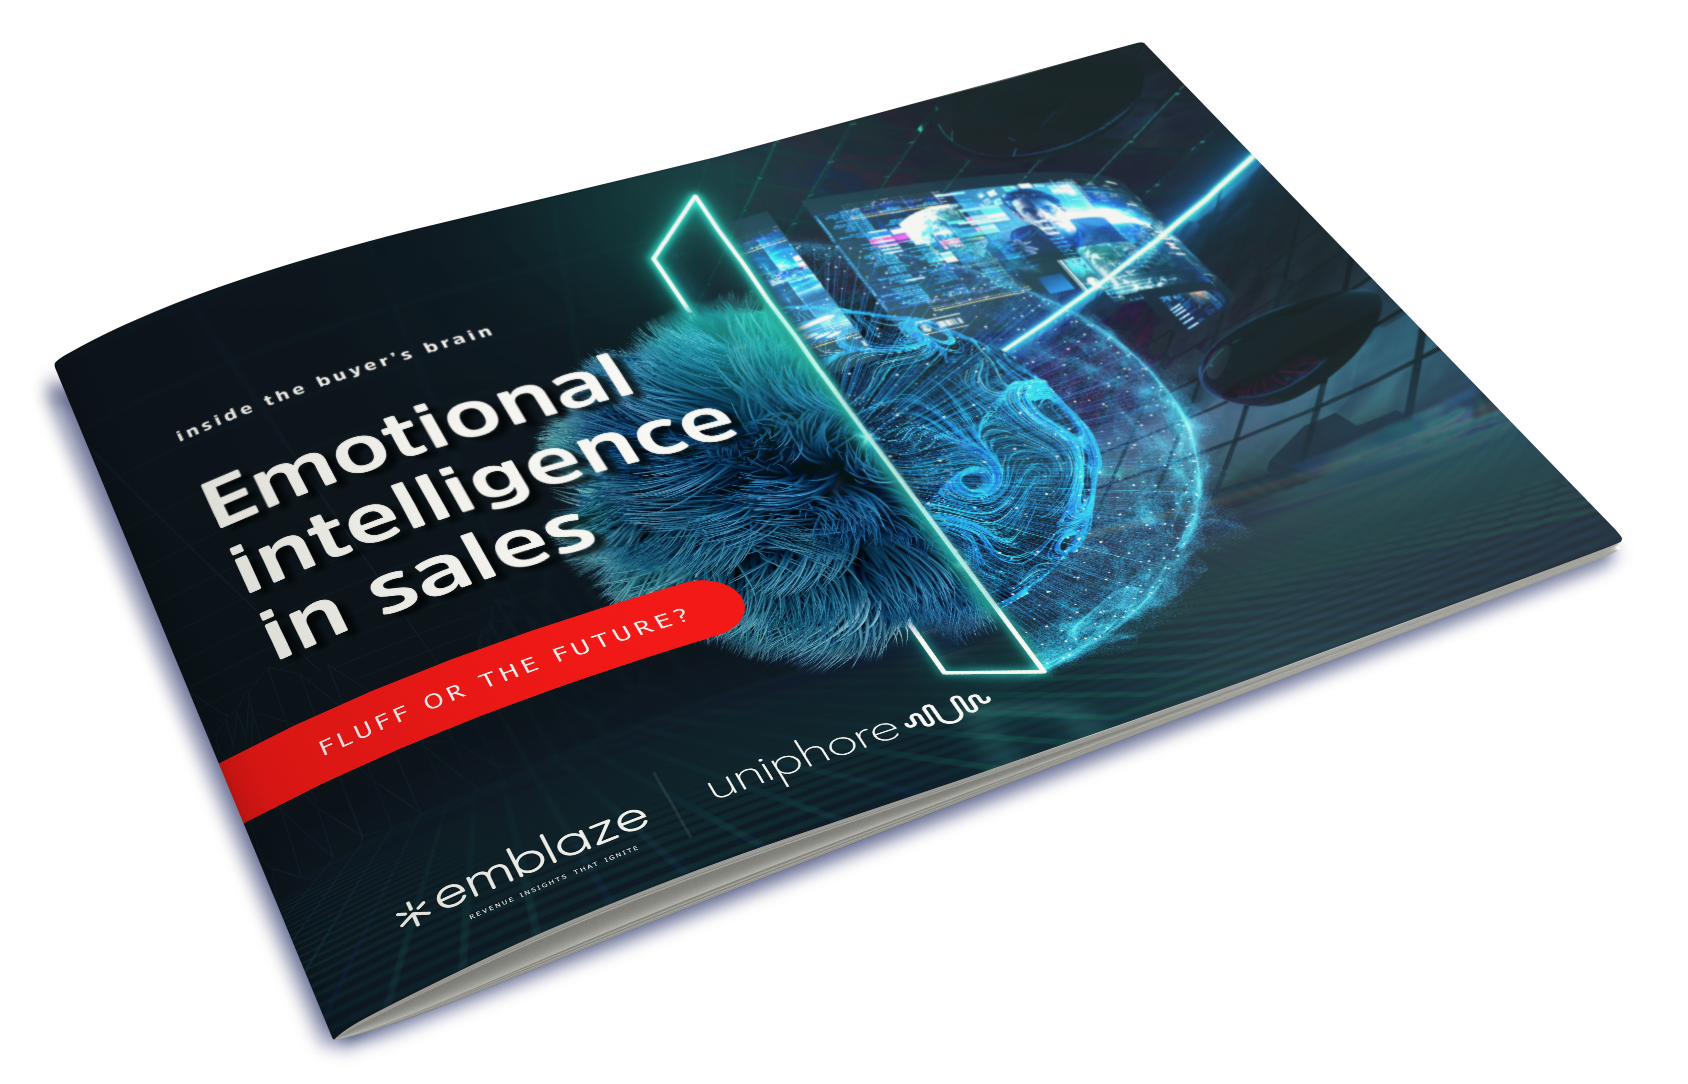 Emotional Intelligence in Sales: An Ebook on Enhancing Sales Skills through Emotional Intelligence.